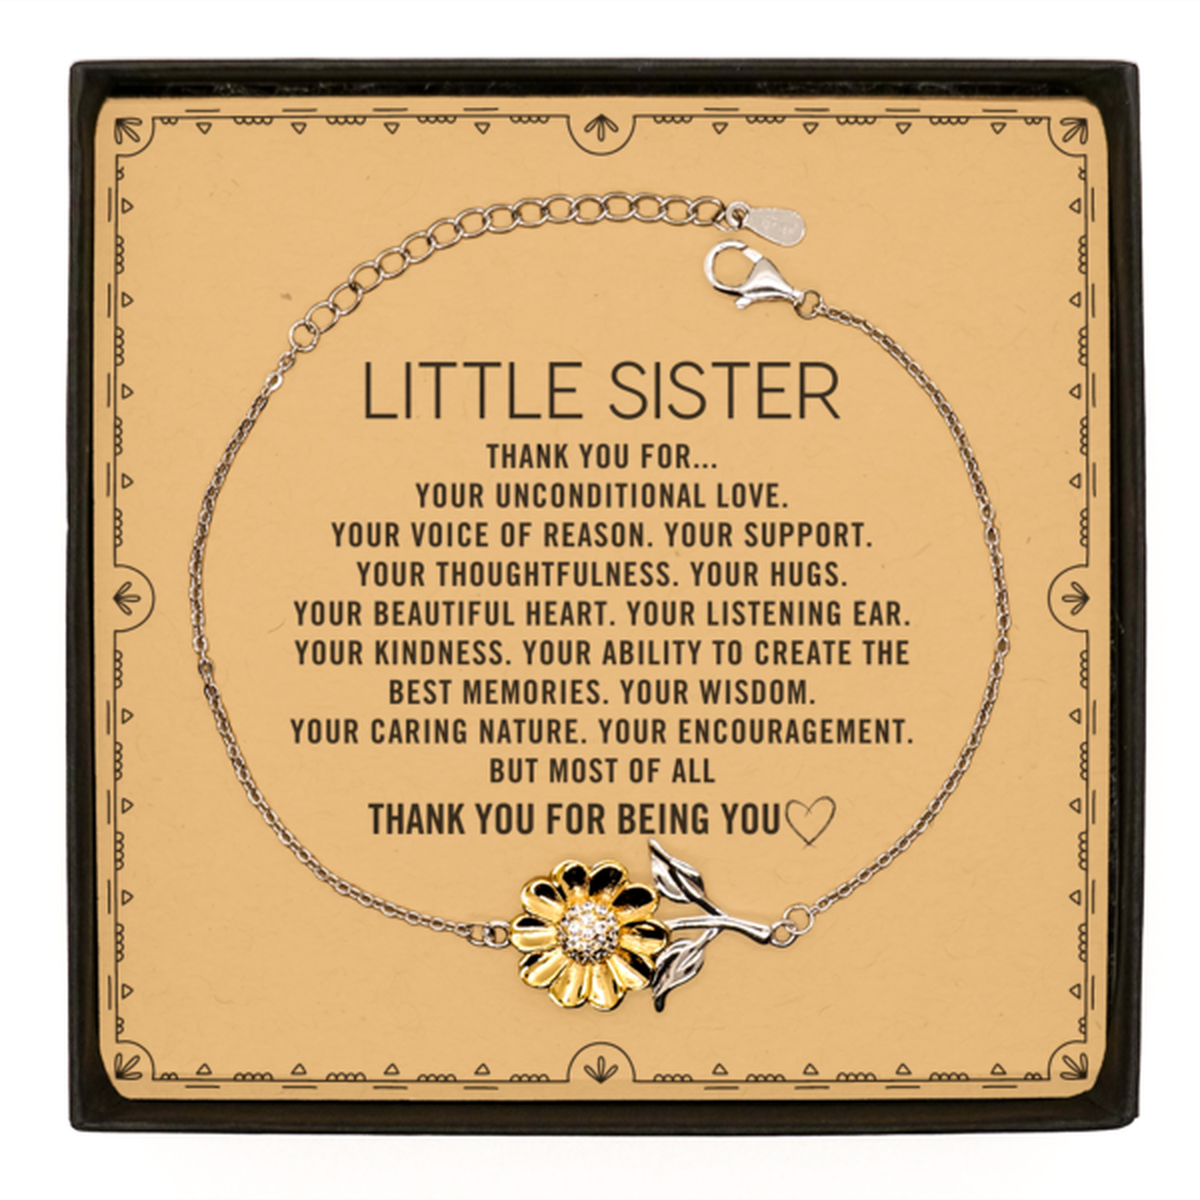 Little Sister Sunflower Bracelet Custom, Message Card Gifts For Little Sister Christmas Graduation Birthday Gifts for Men Women Little Sister Thank you for Your unconditional love